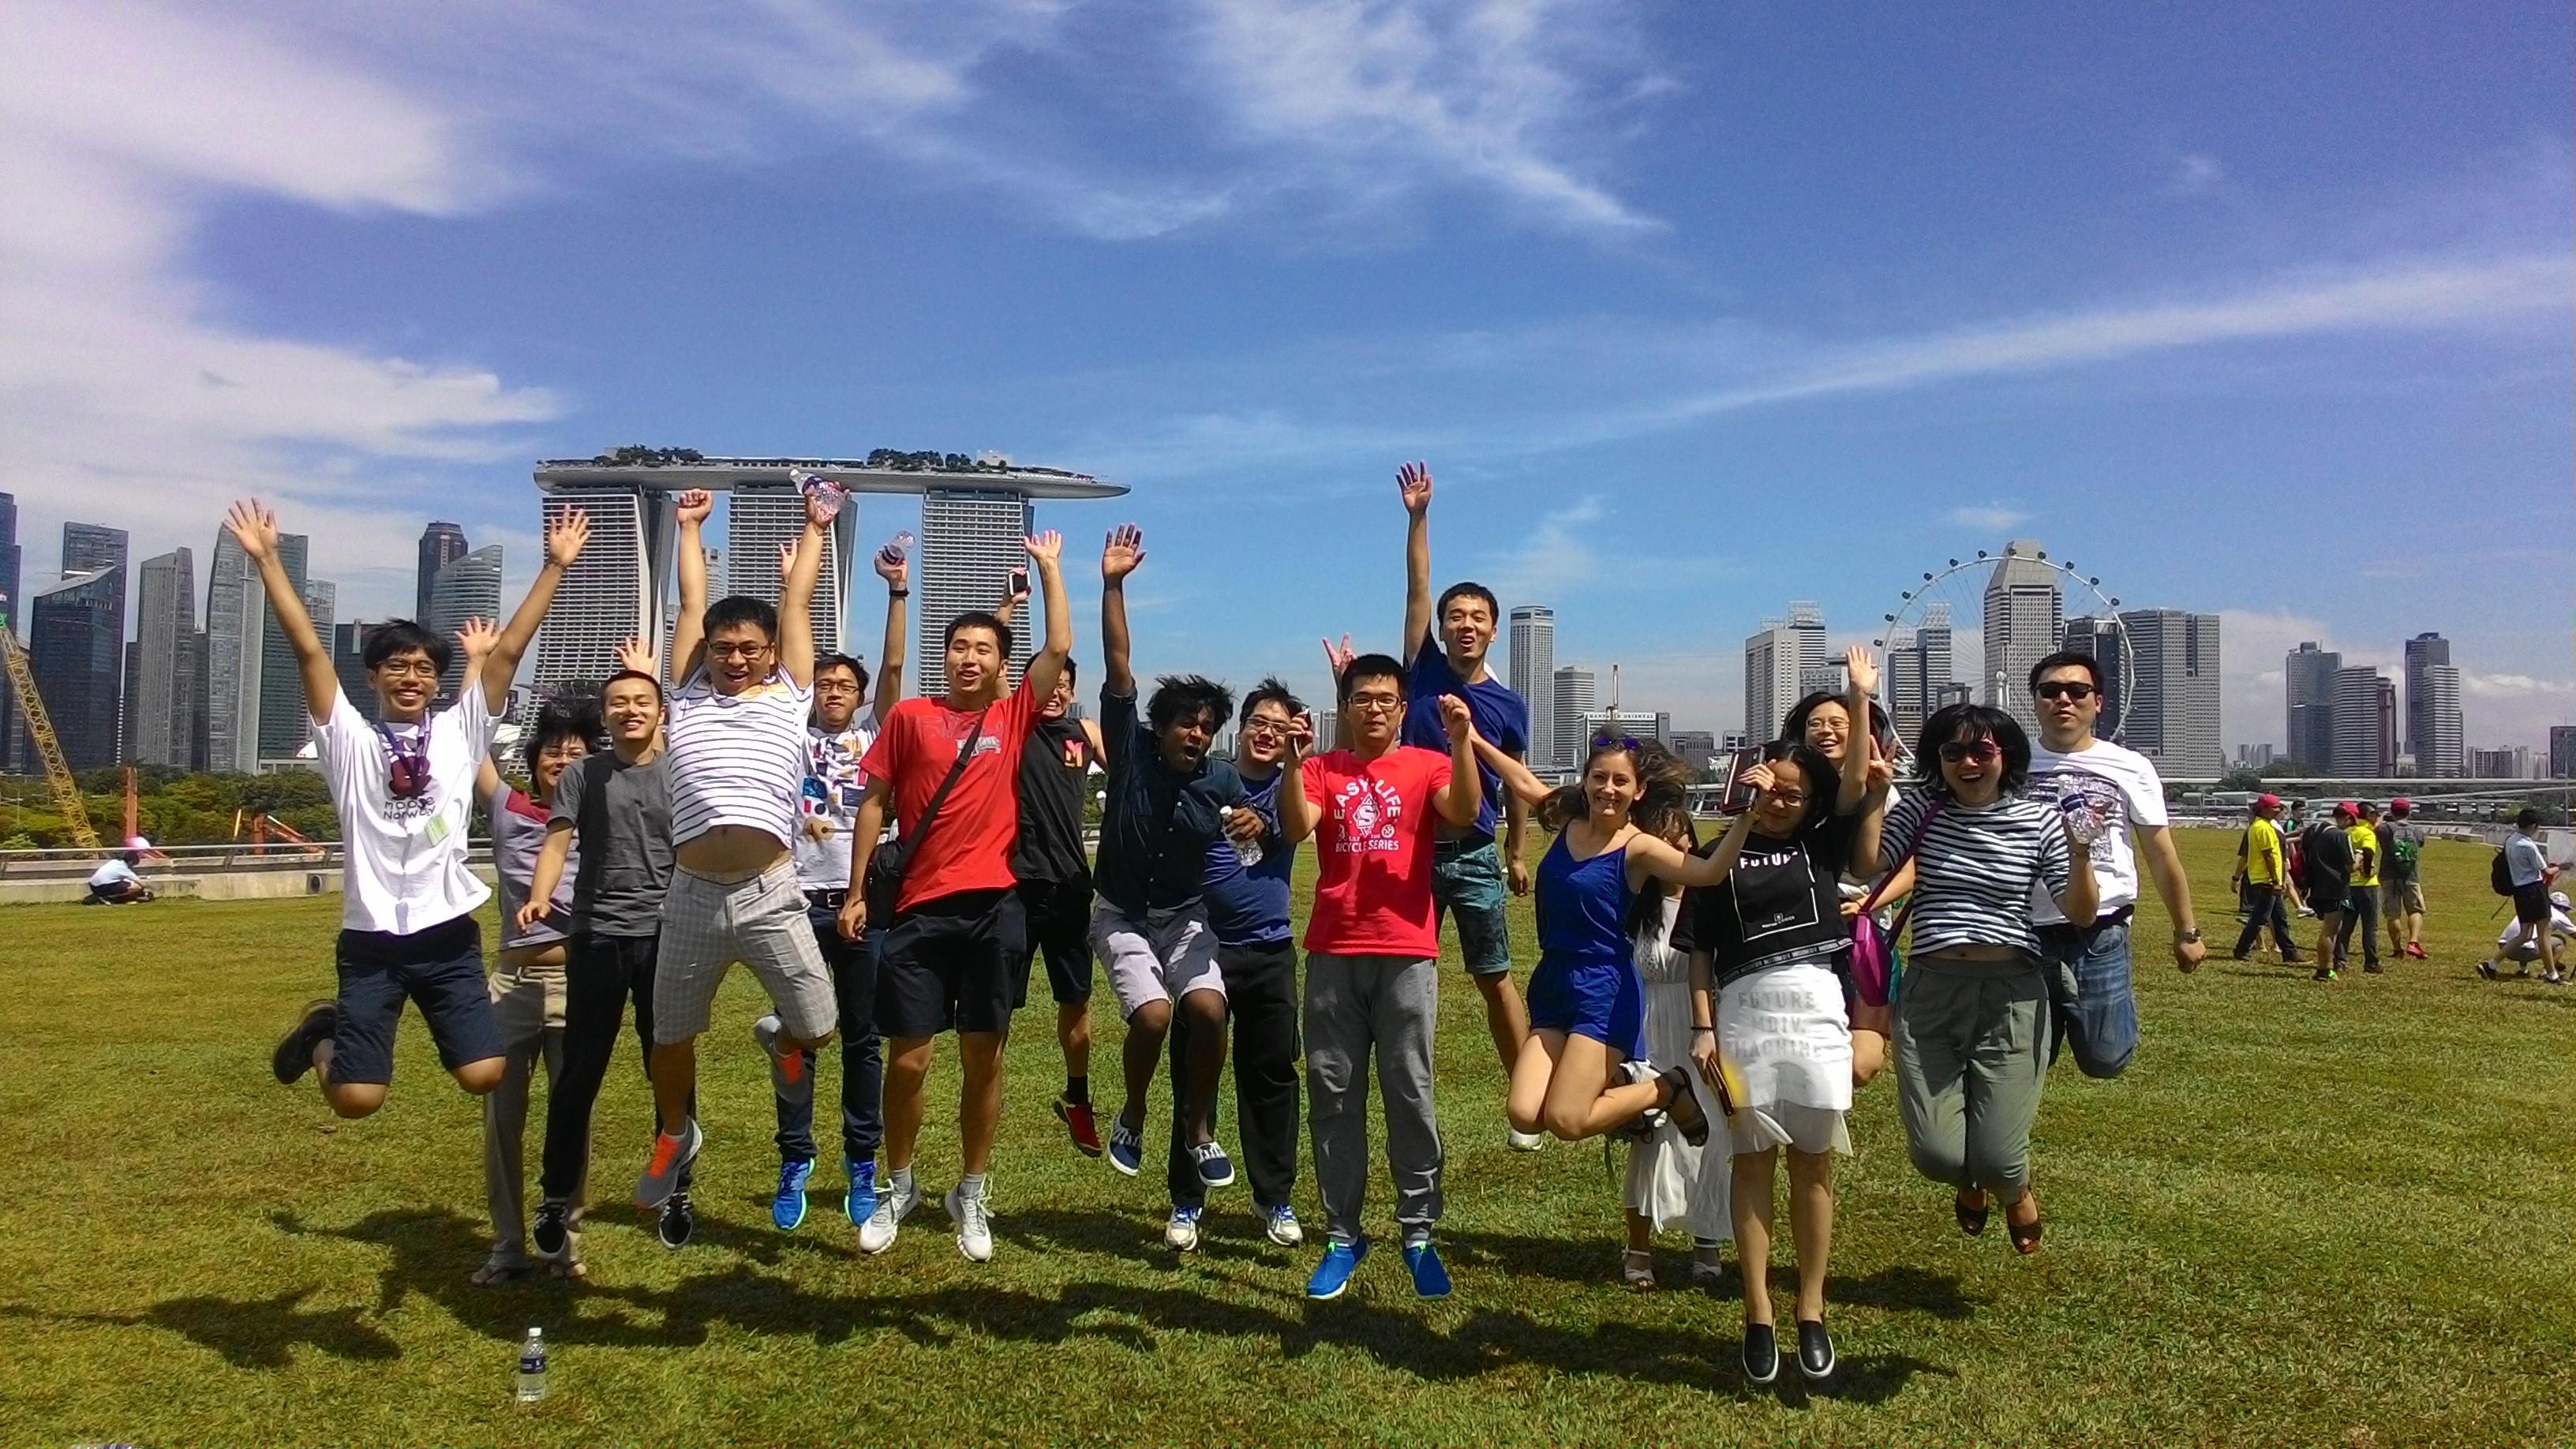 1st year SMU PhD students try out the signature SMU Jump against the Singapore city skyline